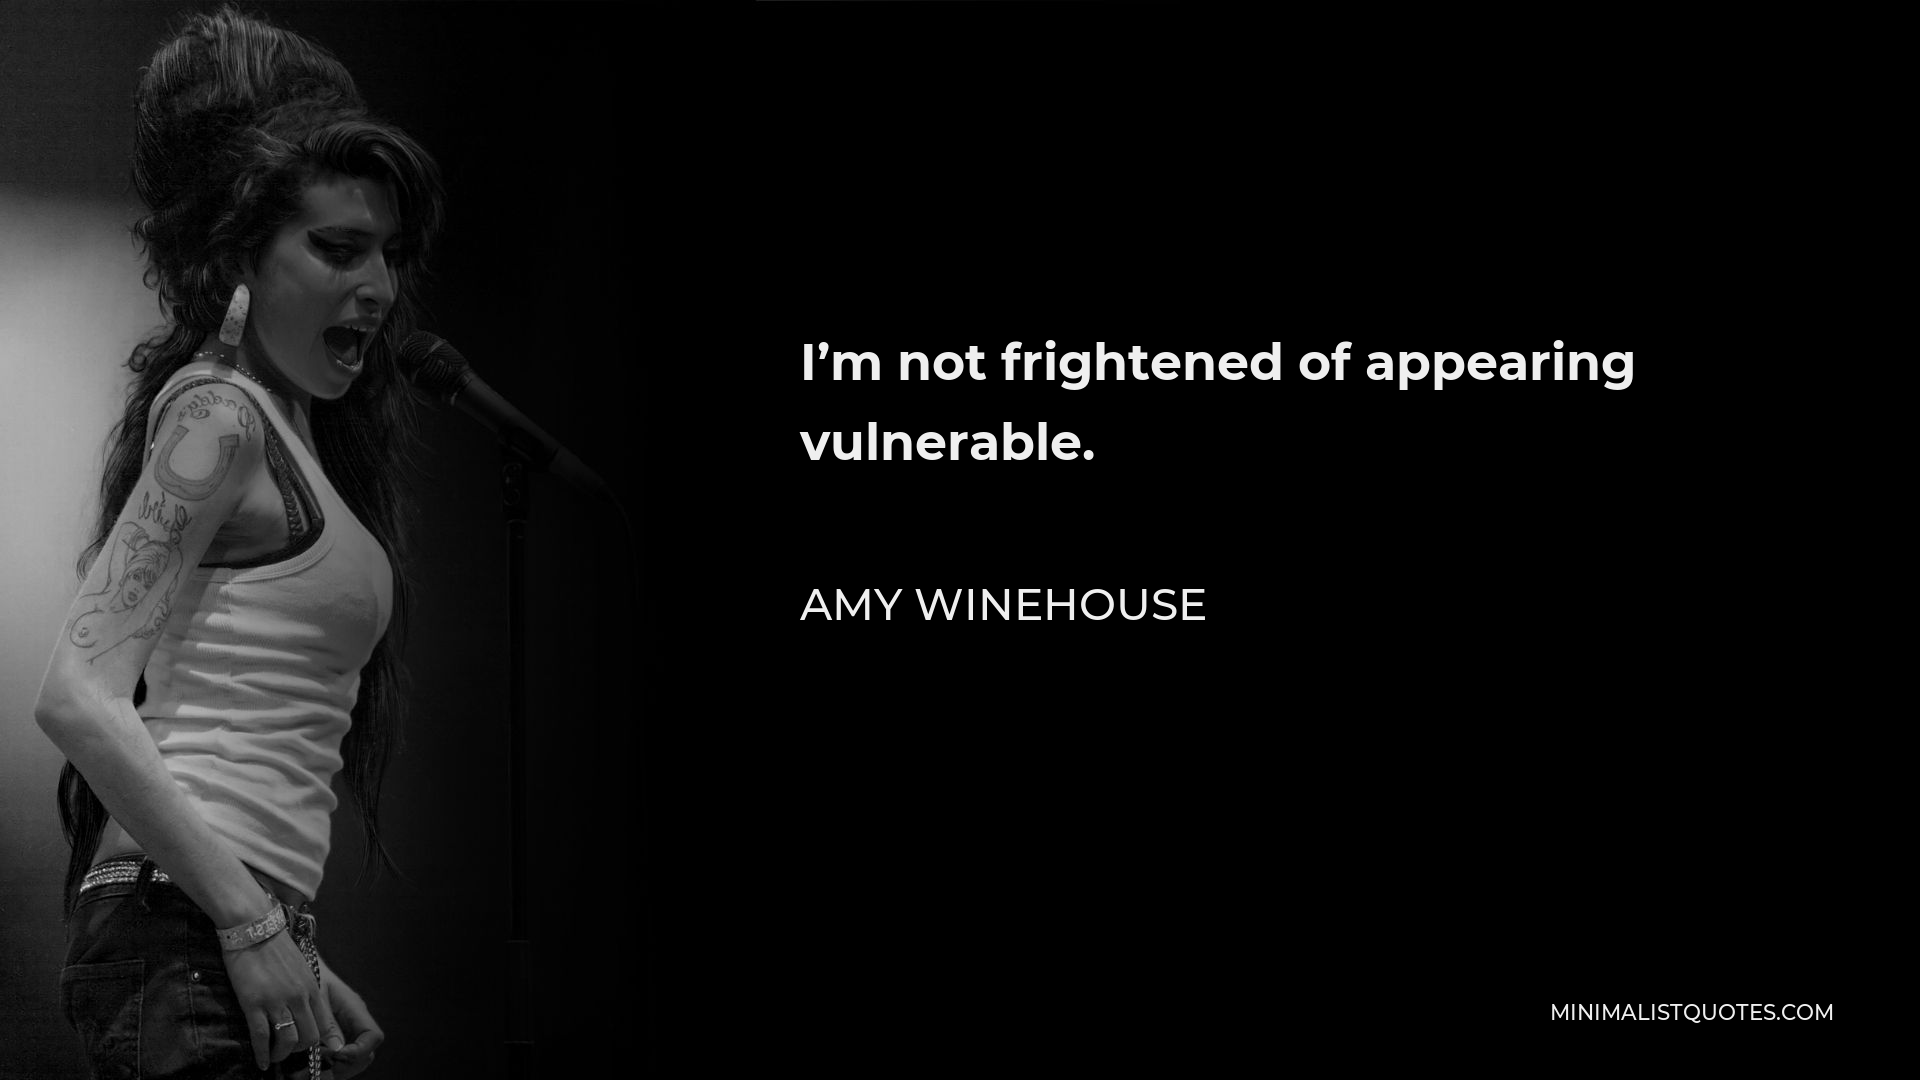 Amy Winehouse Quote - I’m not frightened of appearing vulnerable.